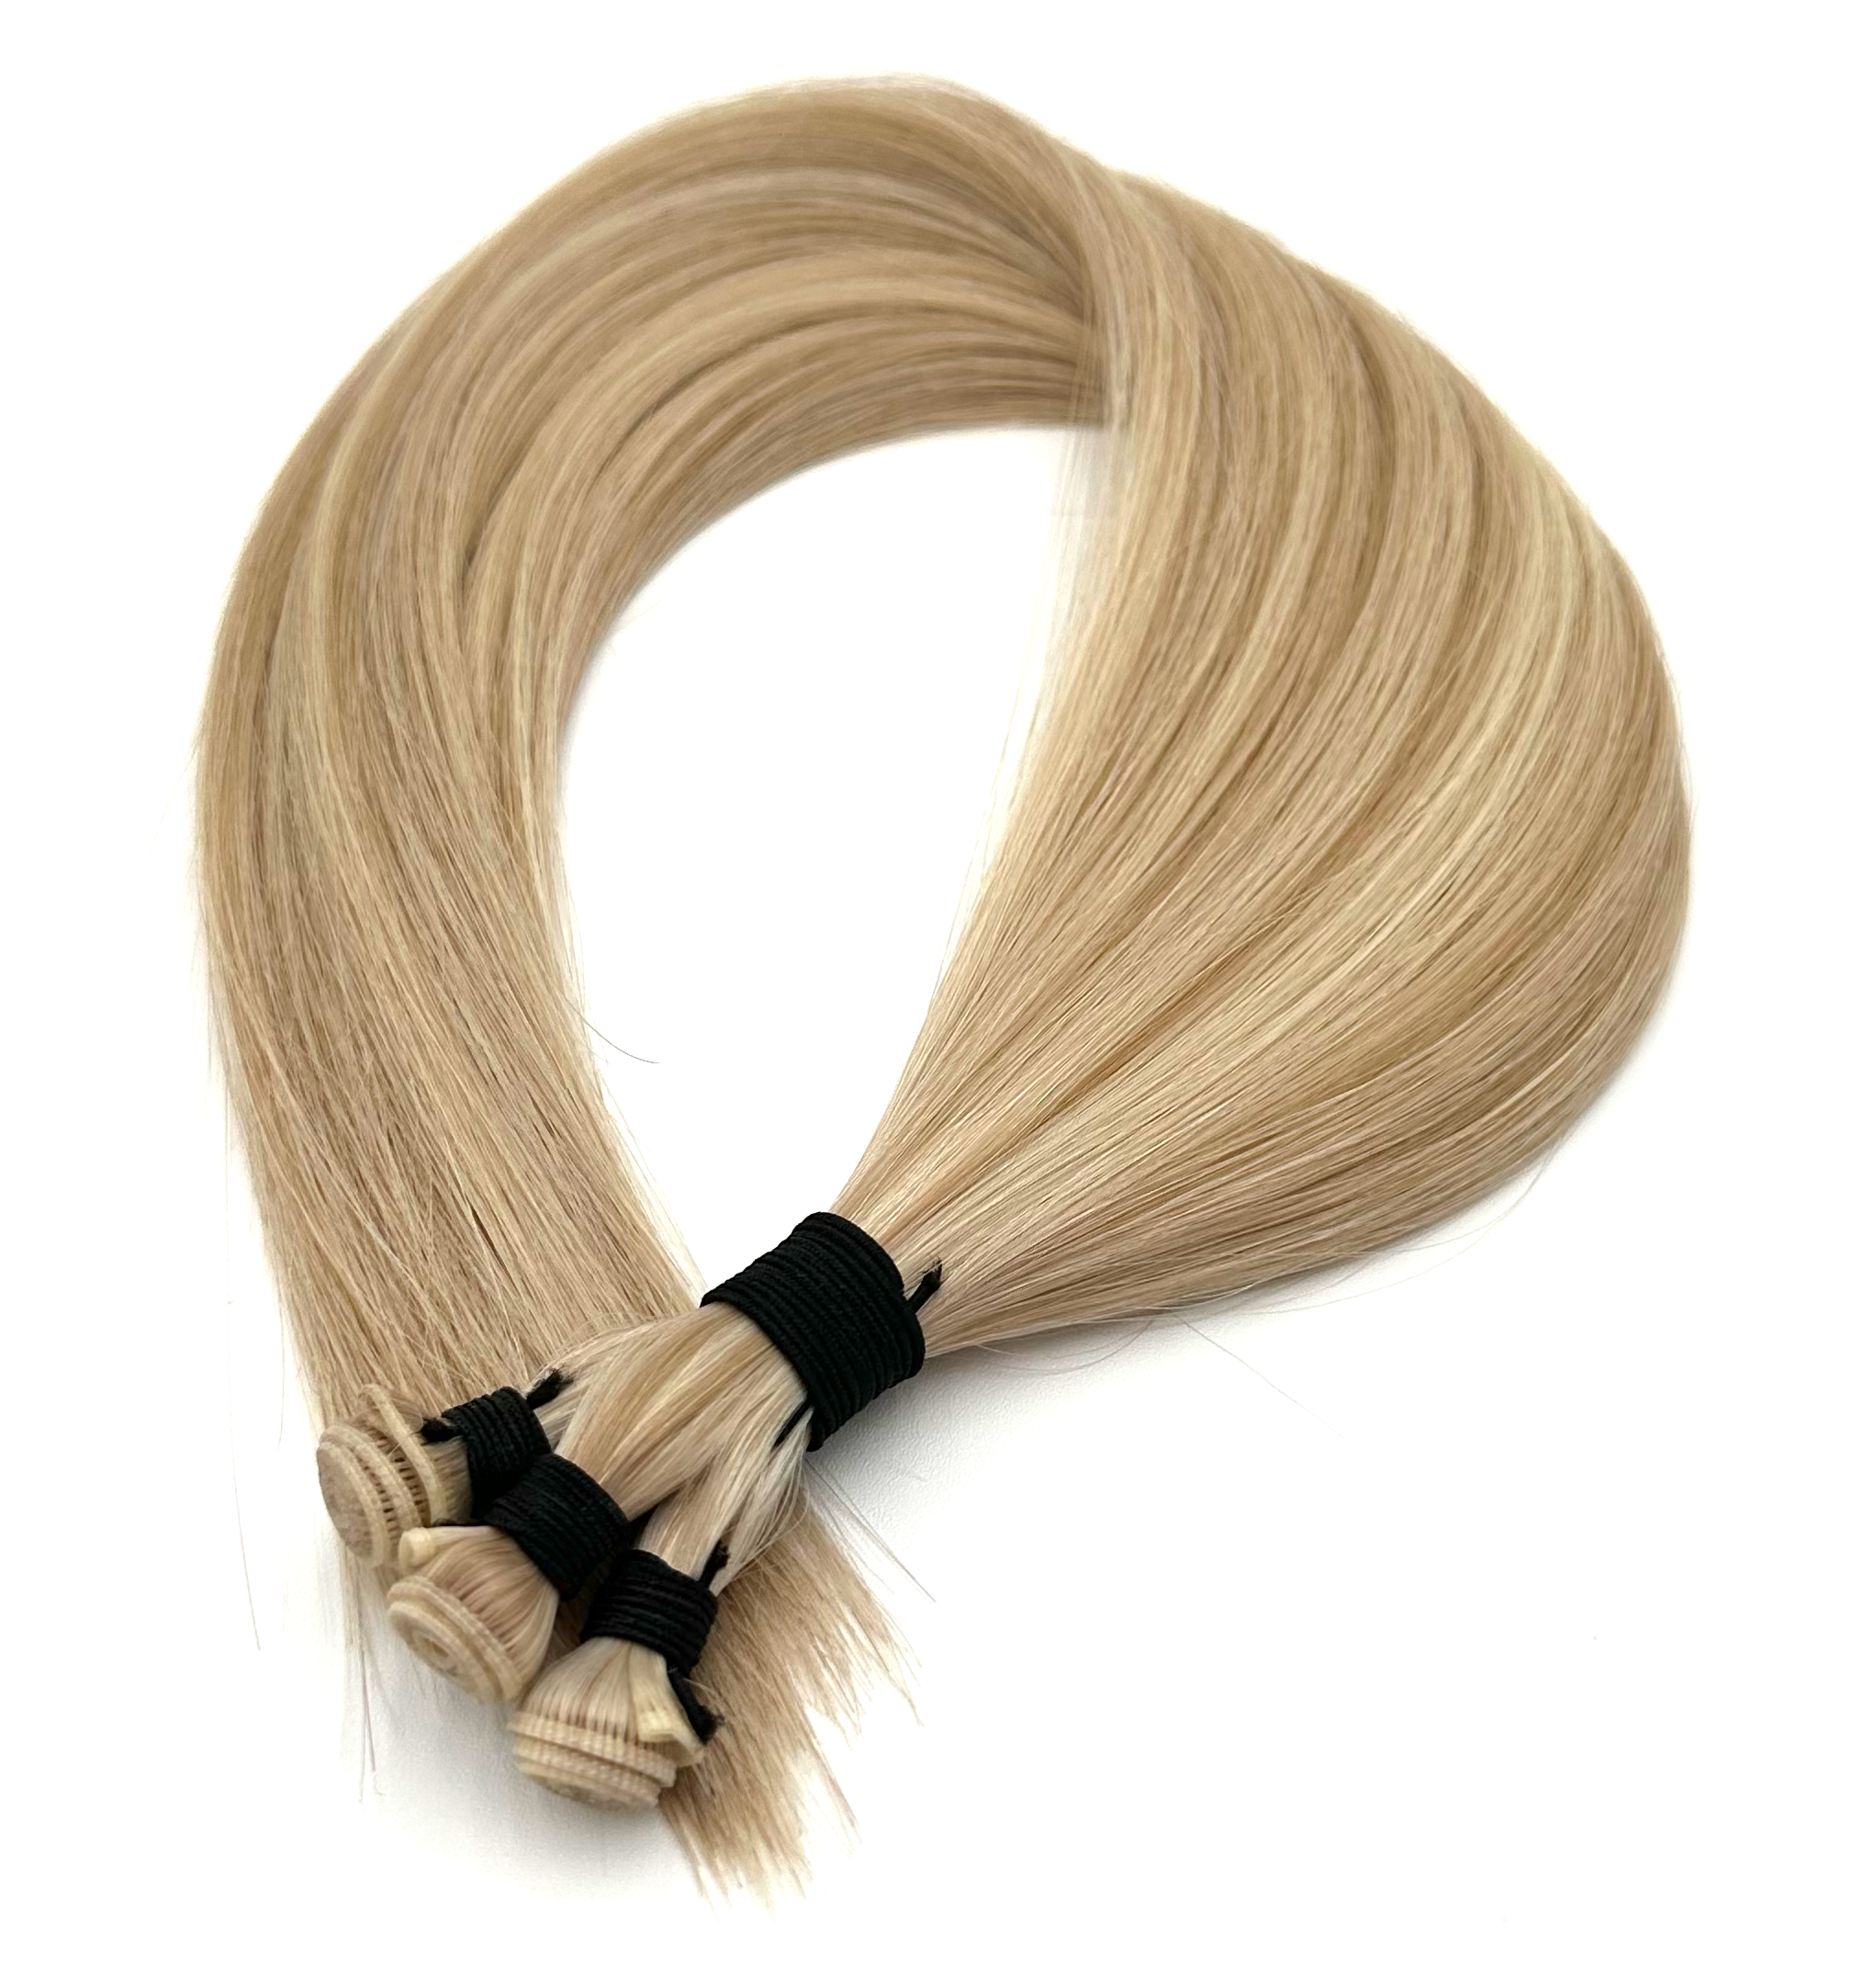 Experience the Magic of Cuticle Aligned Strands with Belt Hair Extensions